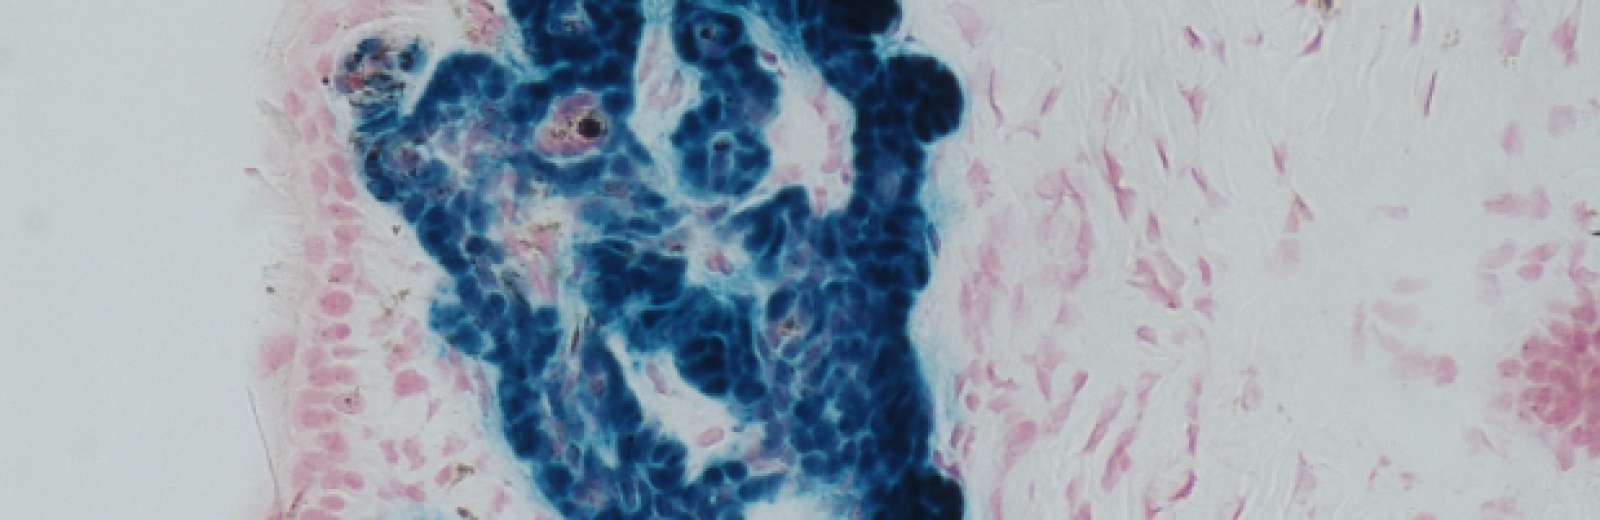 This image shows a tumour